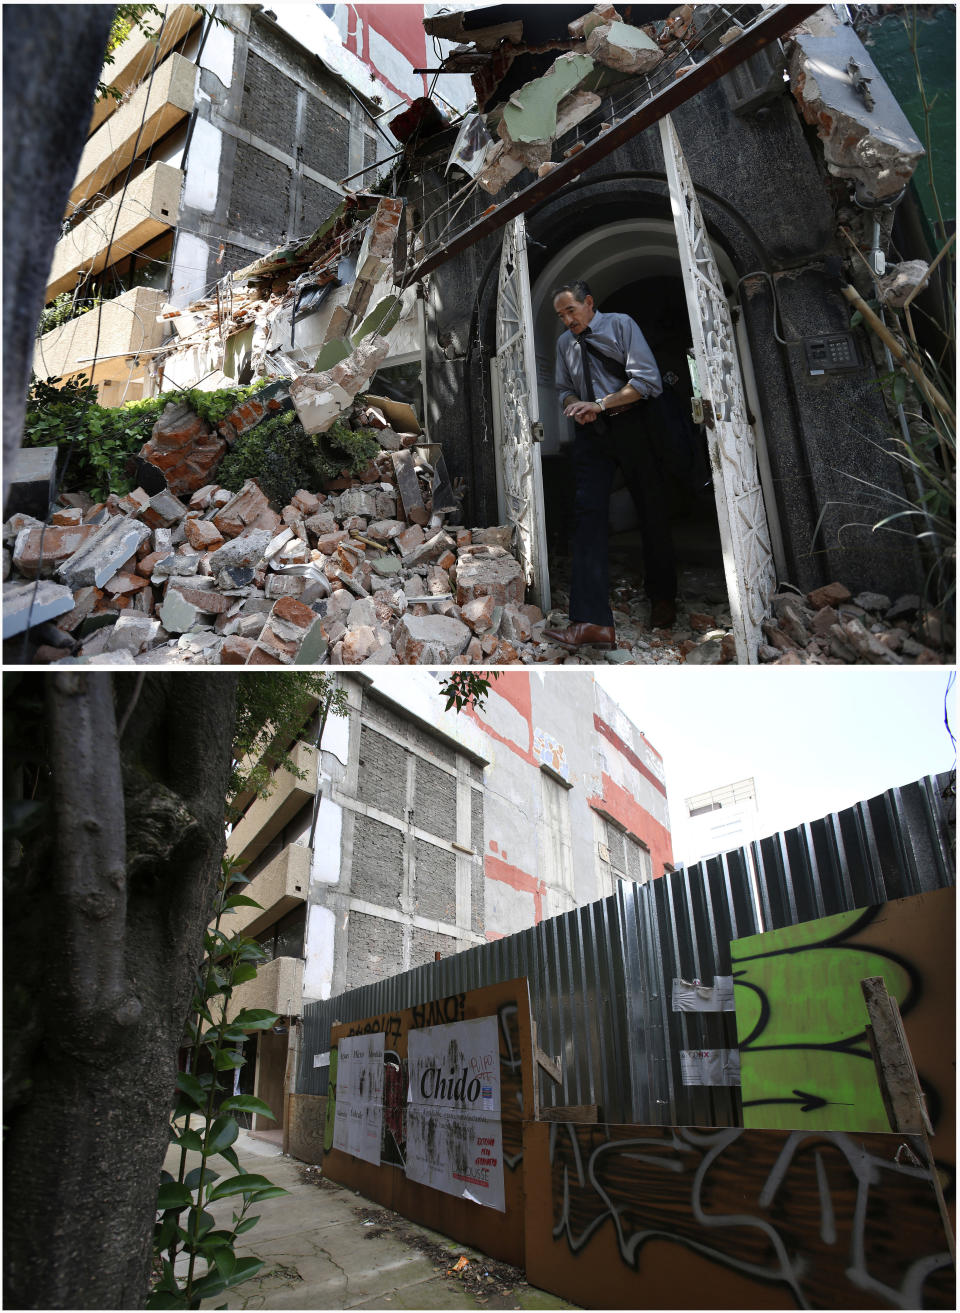 This photo combination shows the site at Amsterdam 25 where a building collapsed in last year's 7.1 magnitude earthquake, immediately after the quake on Sept. 19, 2017, top, and one year later, on Sept. 18, 2018, in Mexico City. The slow pace of demolition, let alone rebuilding, is frustrating both to those who lost their homes and to those left living amid shattered eyesores that look like they could collapse at any time onto sidewalks and streets still cordoned off after the 2017 quake. (AP Photos/Marco Ugarte, Rebecca Blackwell)